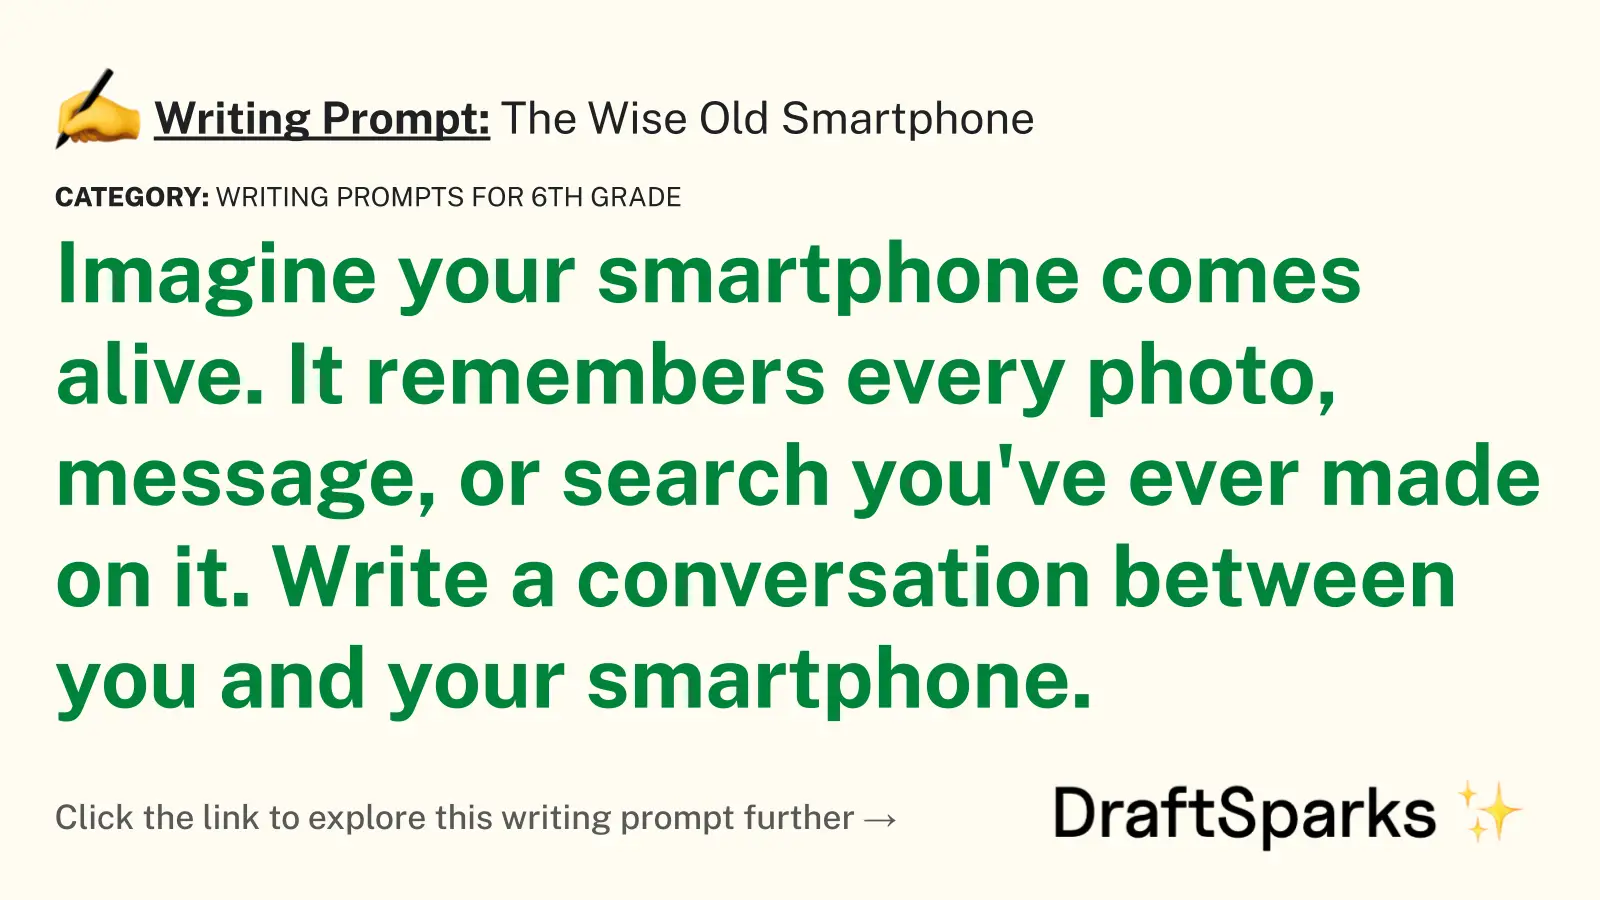 The Wise Old Smartphone